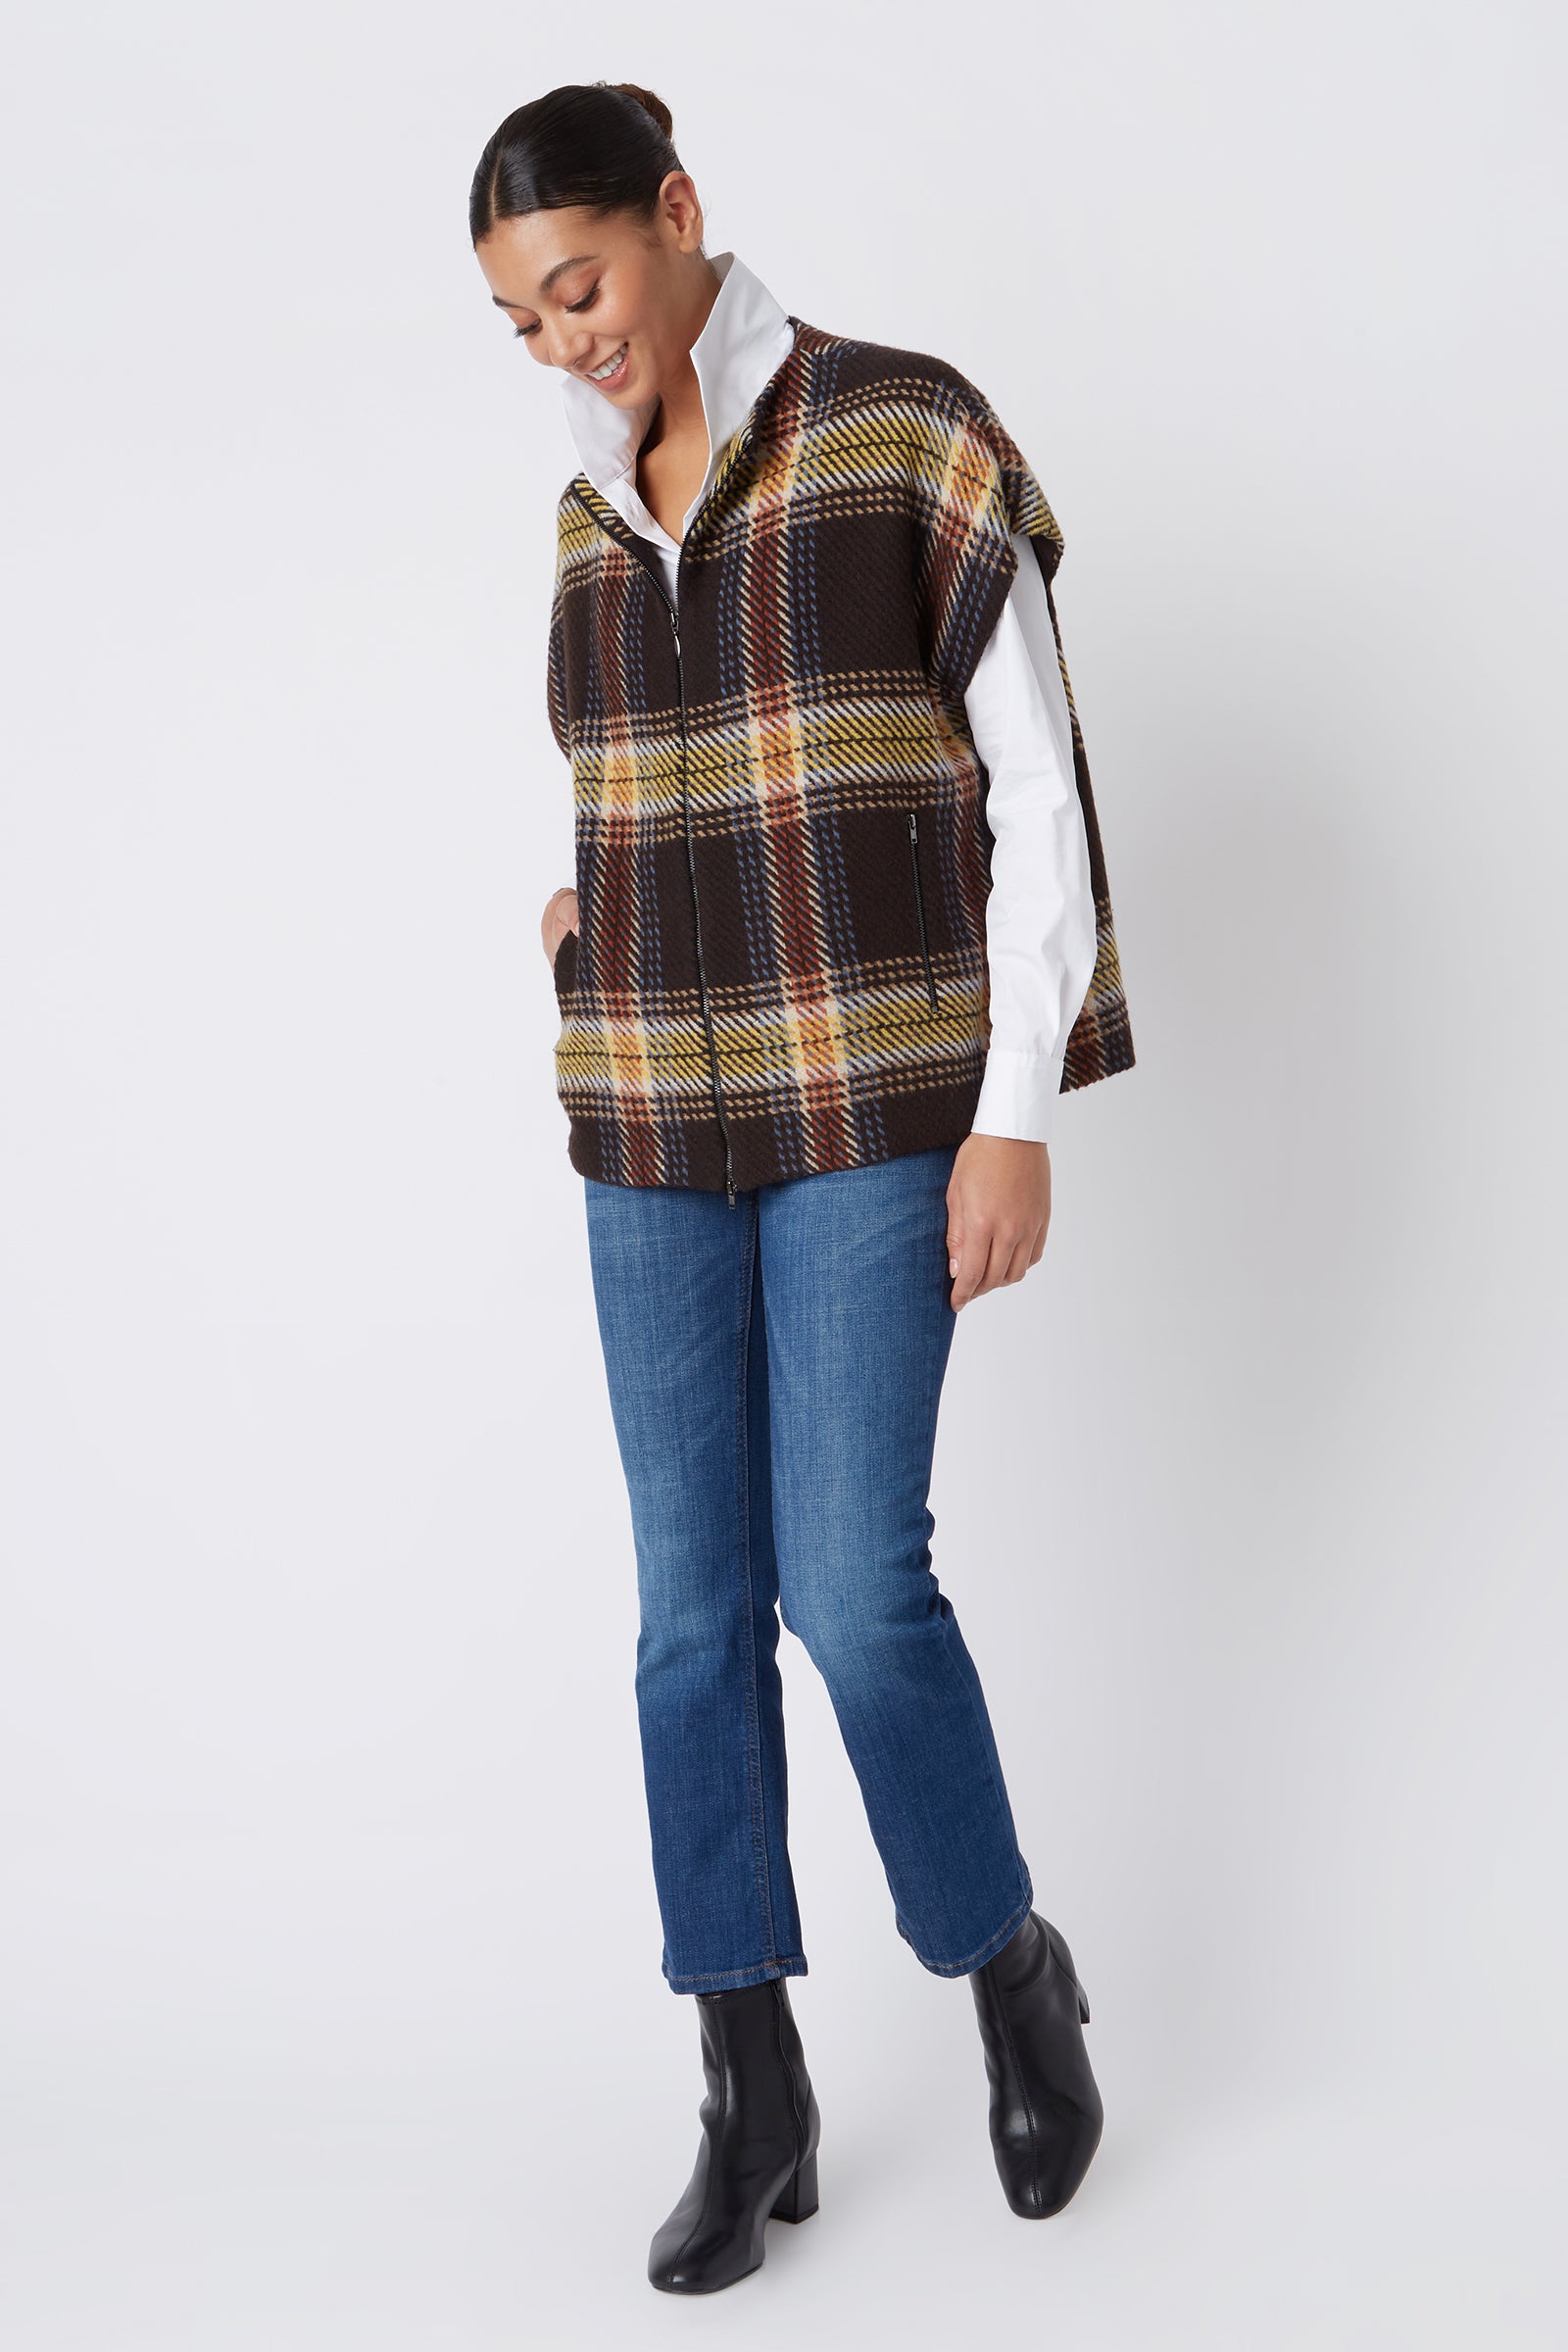 Kal Rieman Mina Zip Vest in Bold Plaid on Model Looking Down Full Front View